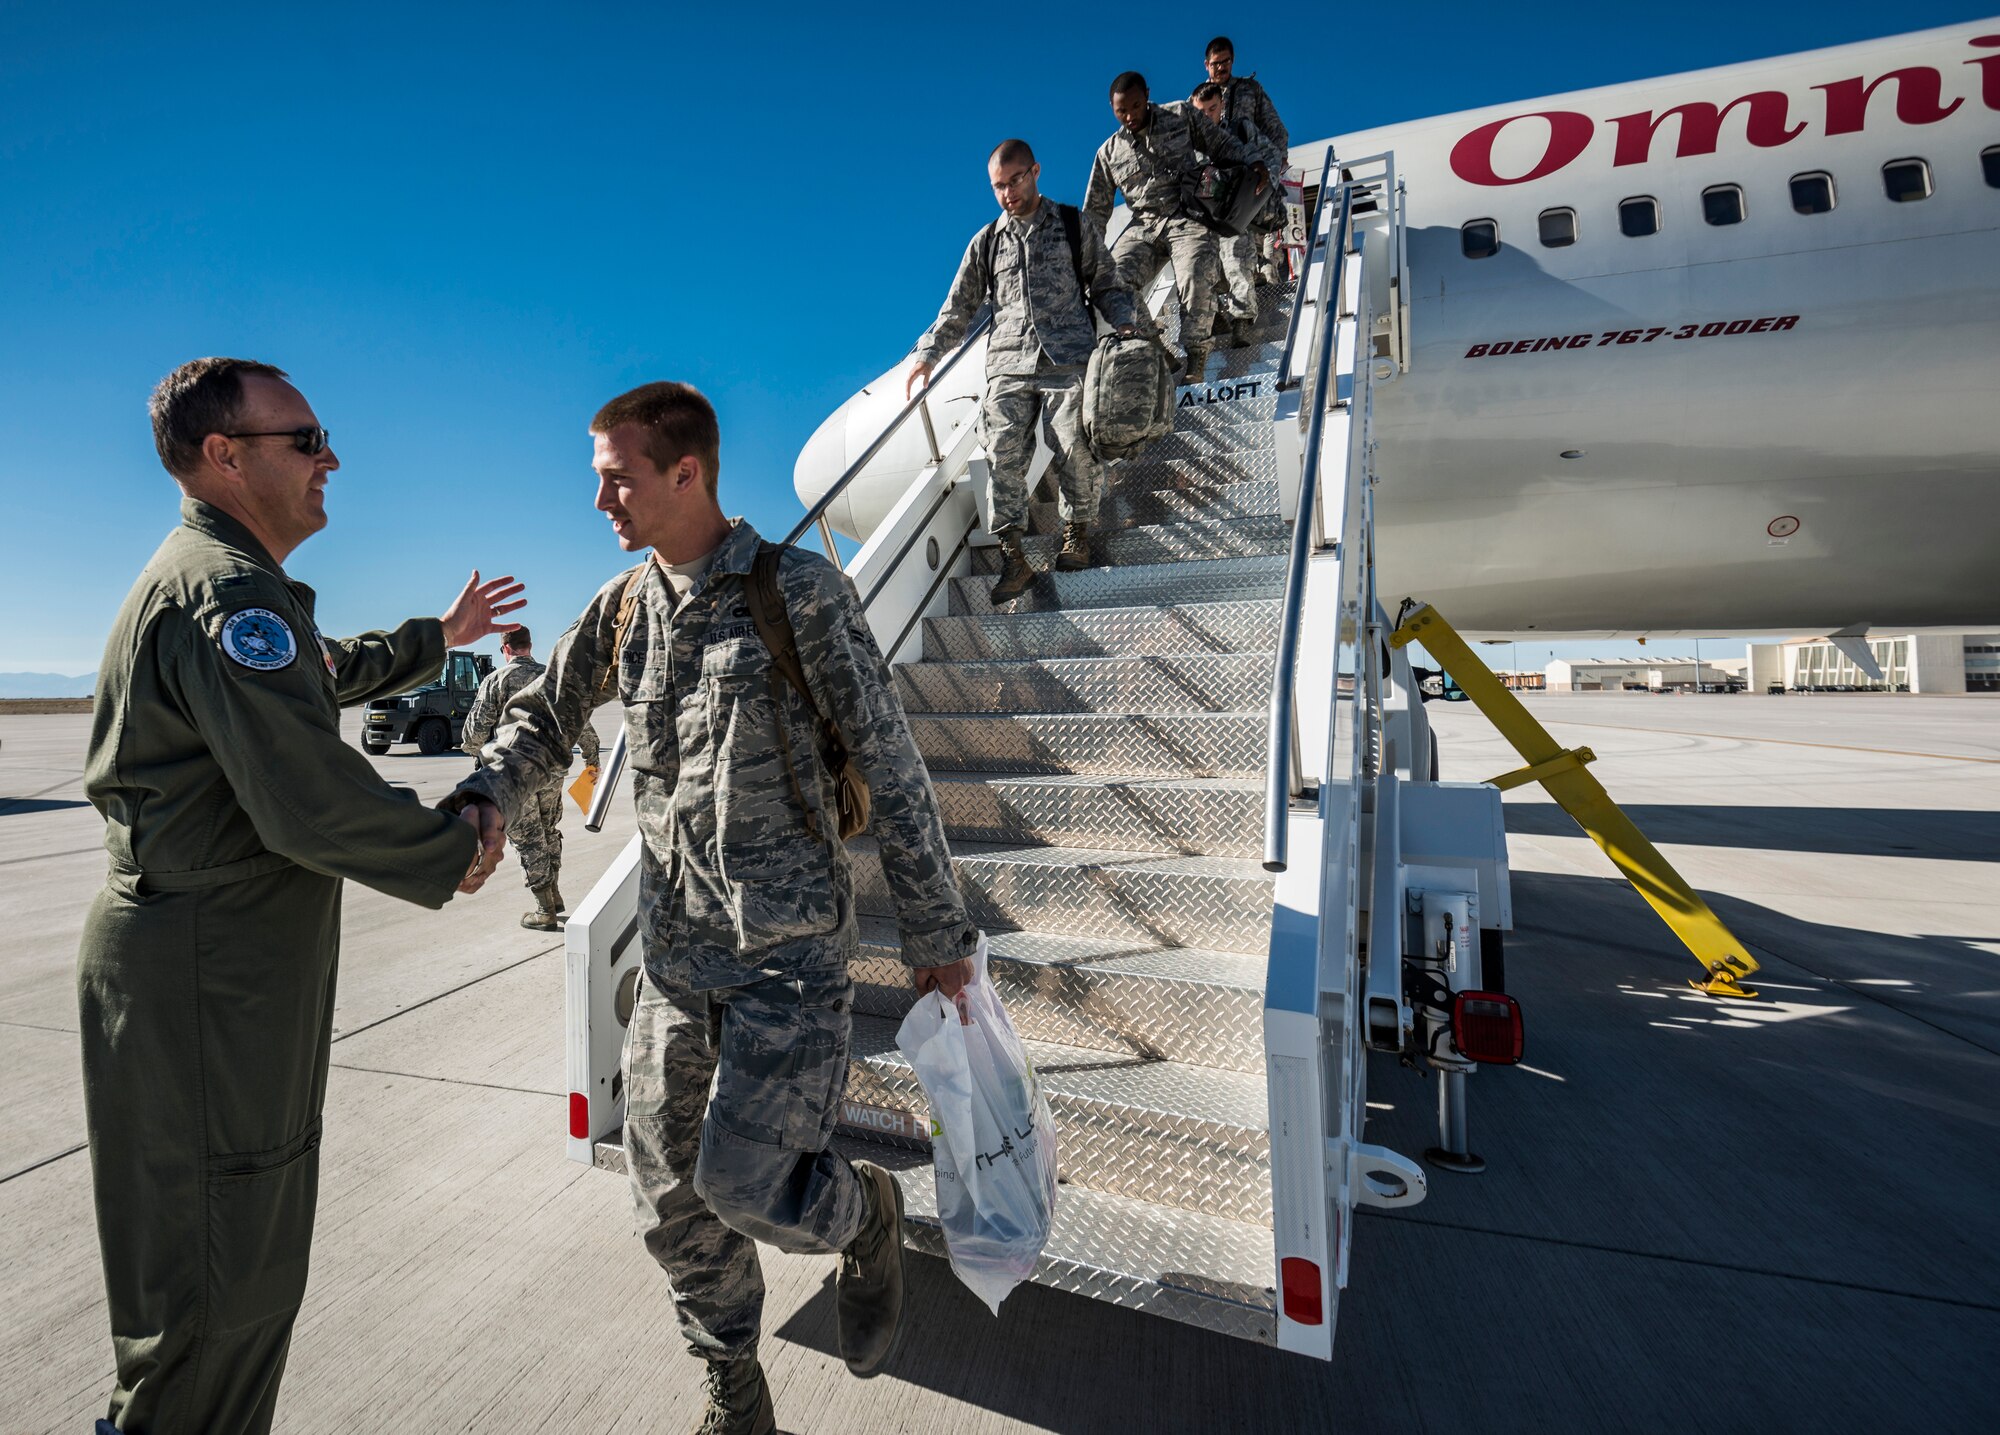 U.S. Air Force Col. Chris Short (left), 366th Fighter Wing commander, shakes hands with the first Airman to disembark an aircraft at Mountain Home Air Force Base, Idaho, Oct. 5, 2013. The Airmen on the plane were returning from a deployment to Southwest Asia. (U.S. Air Force photo by Tech. Sgt. Samuel Morse/RELEASED)